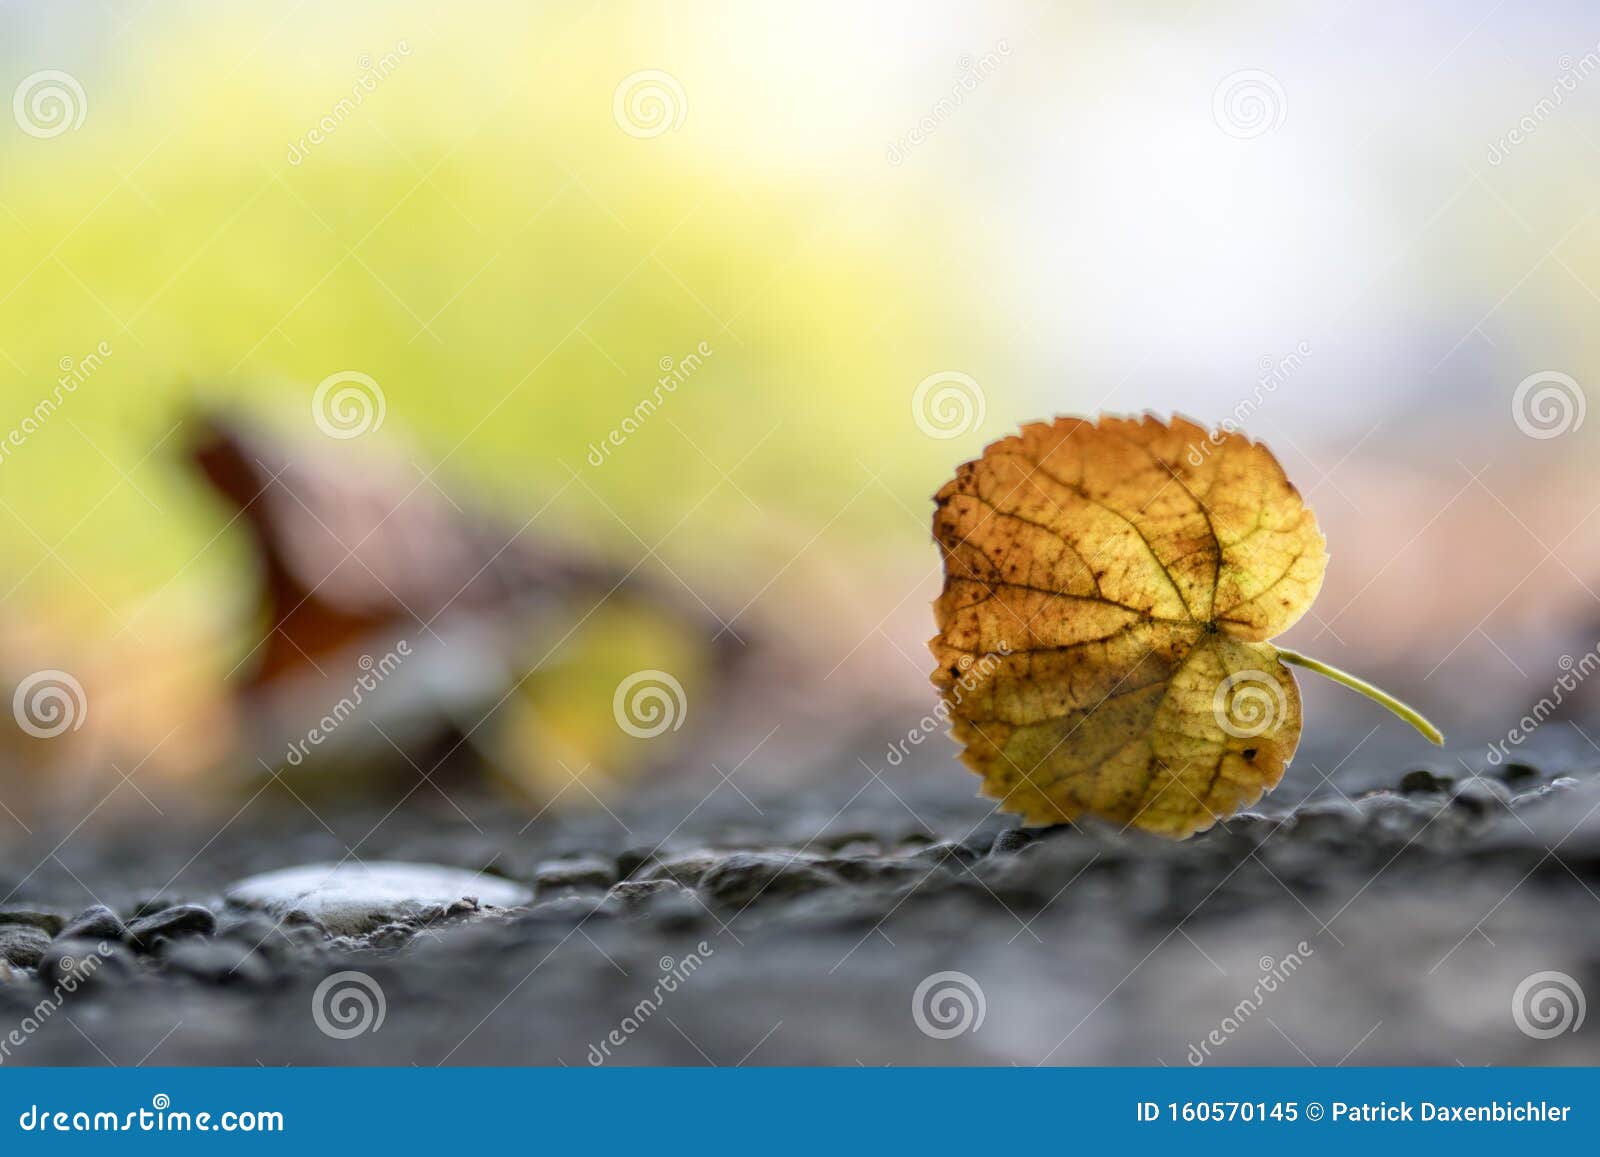 autumn time: beautiful colorful leaf lying on the floor, fall concept with copy space